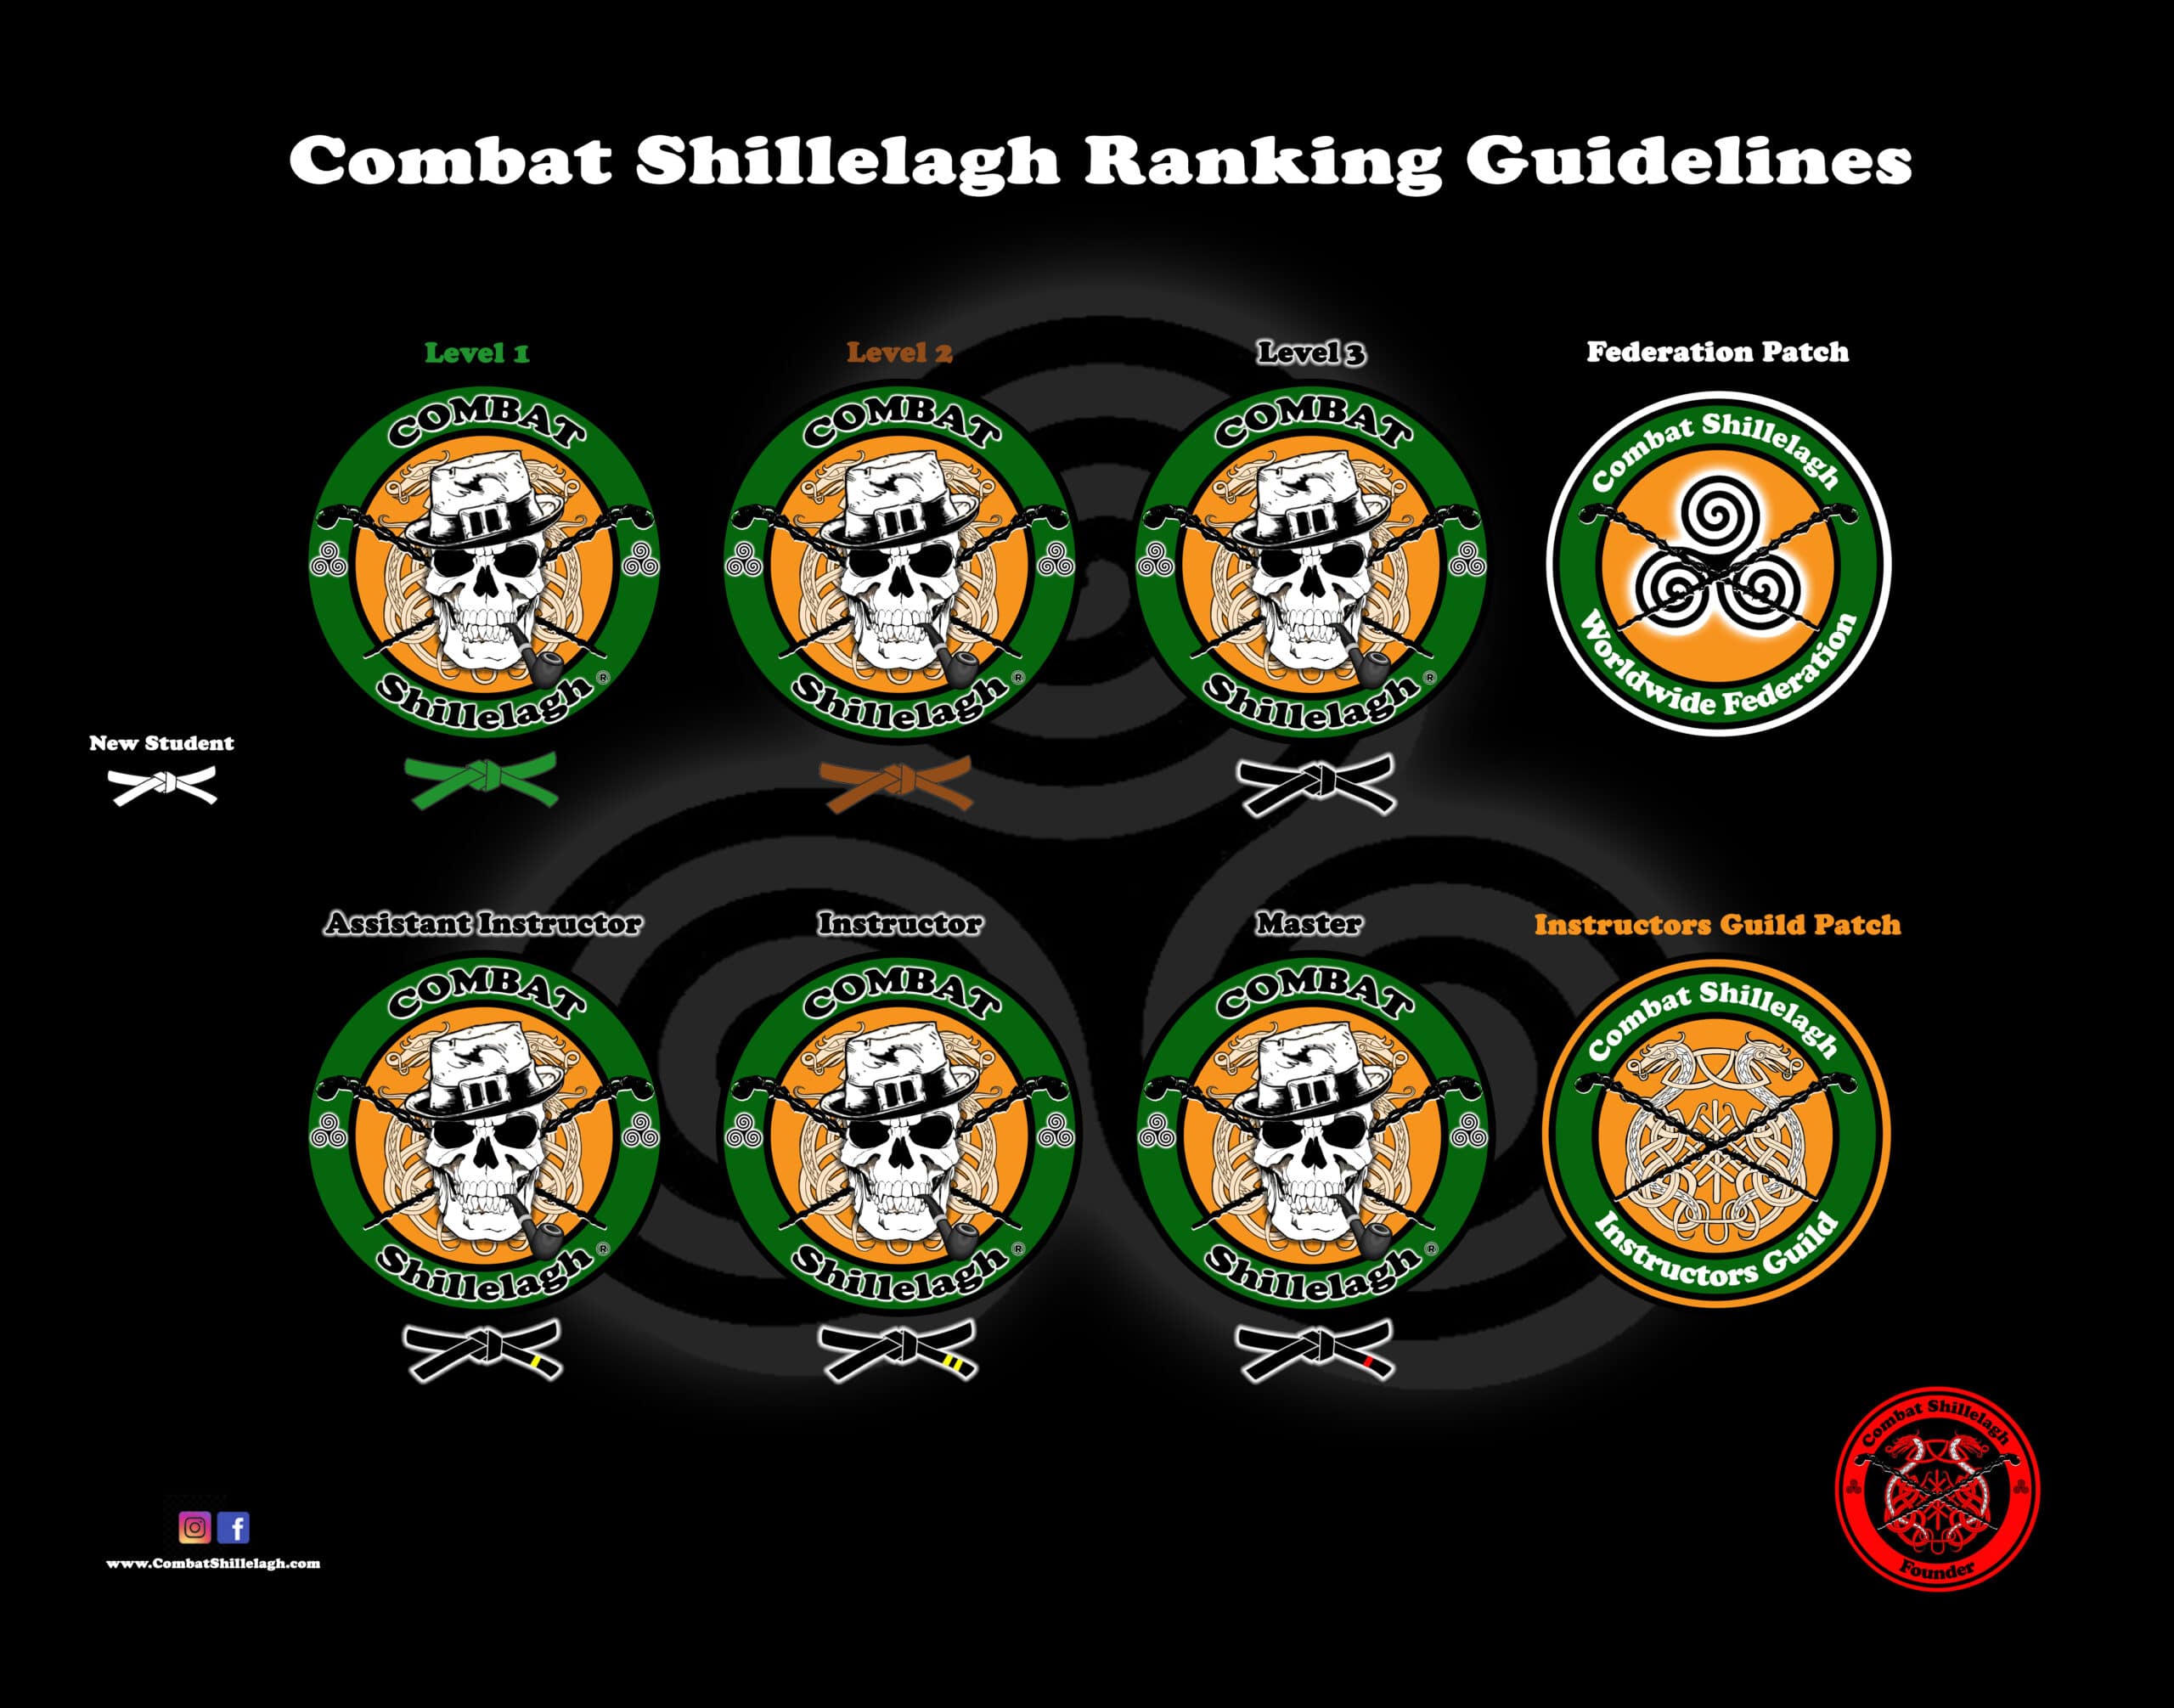 Combat Shillelagh Ranking Structure